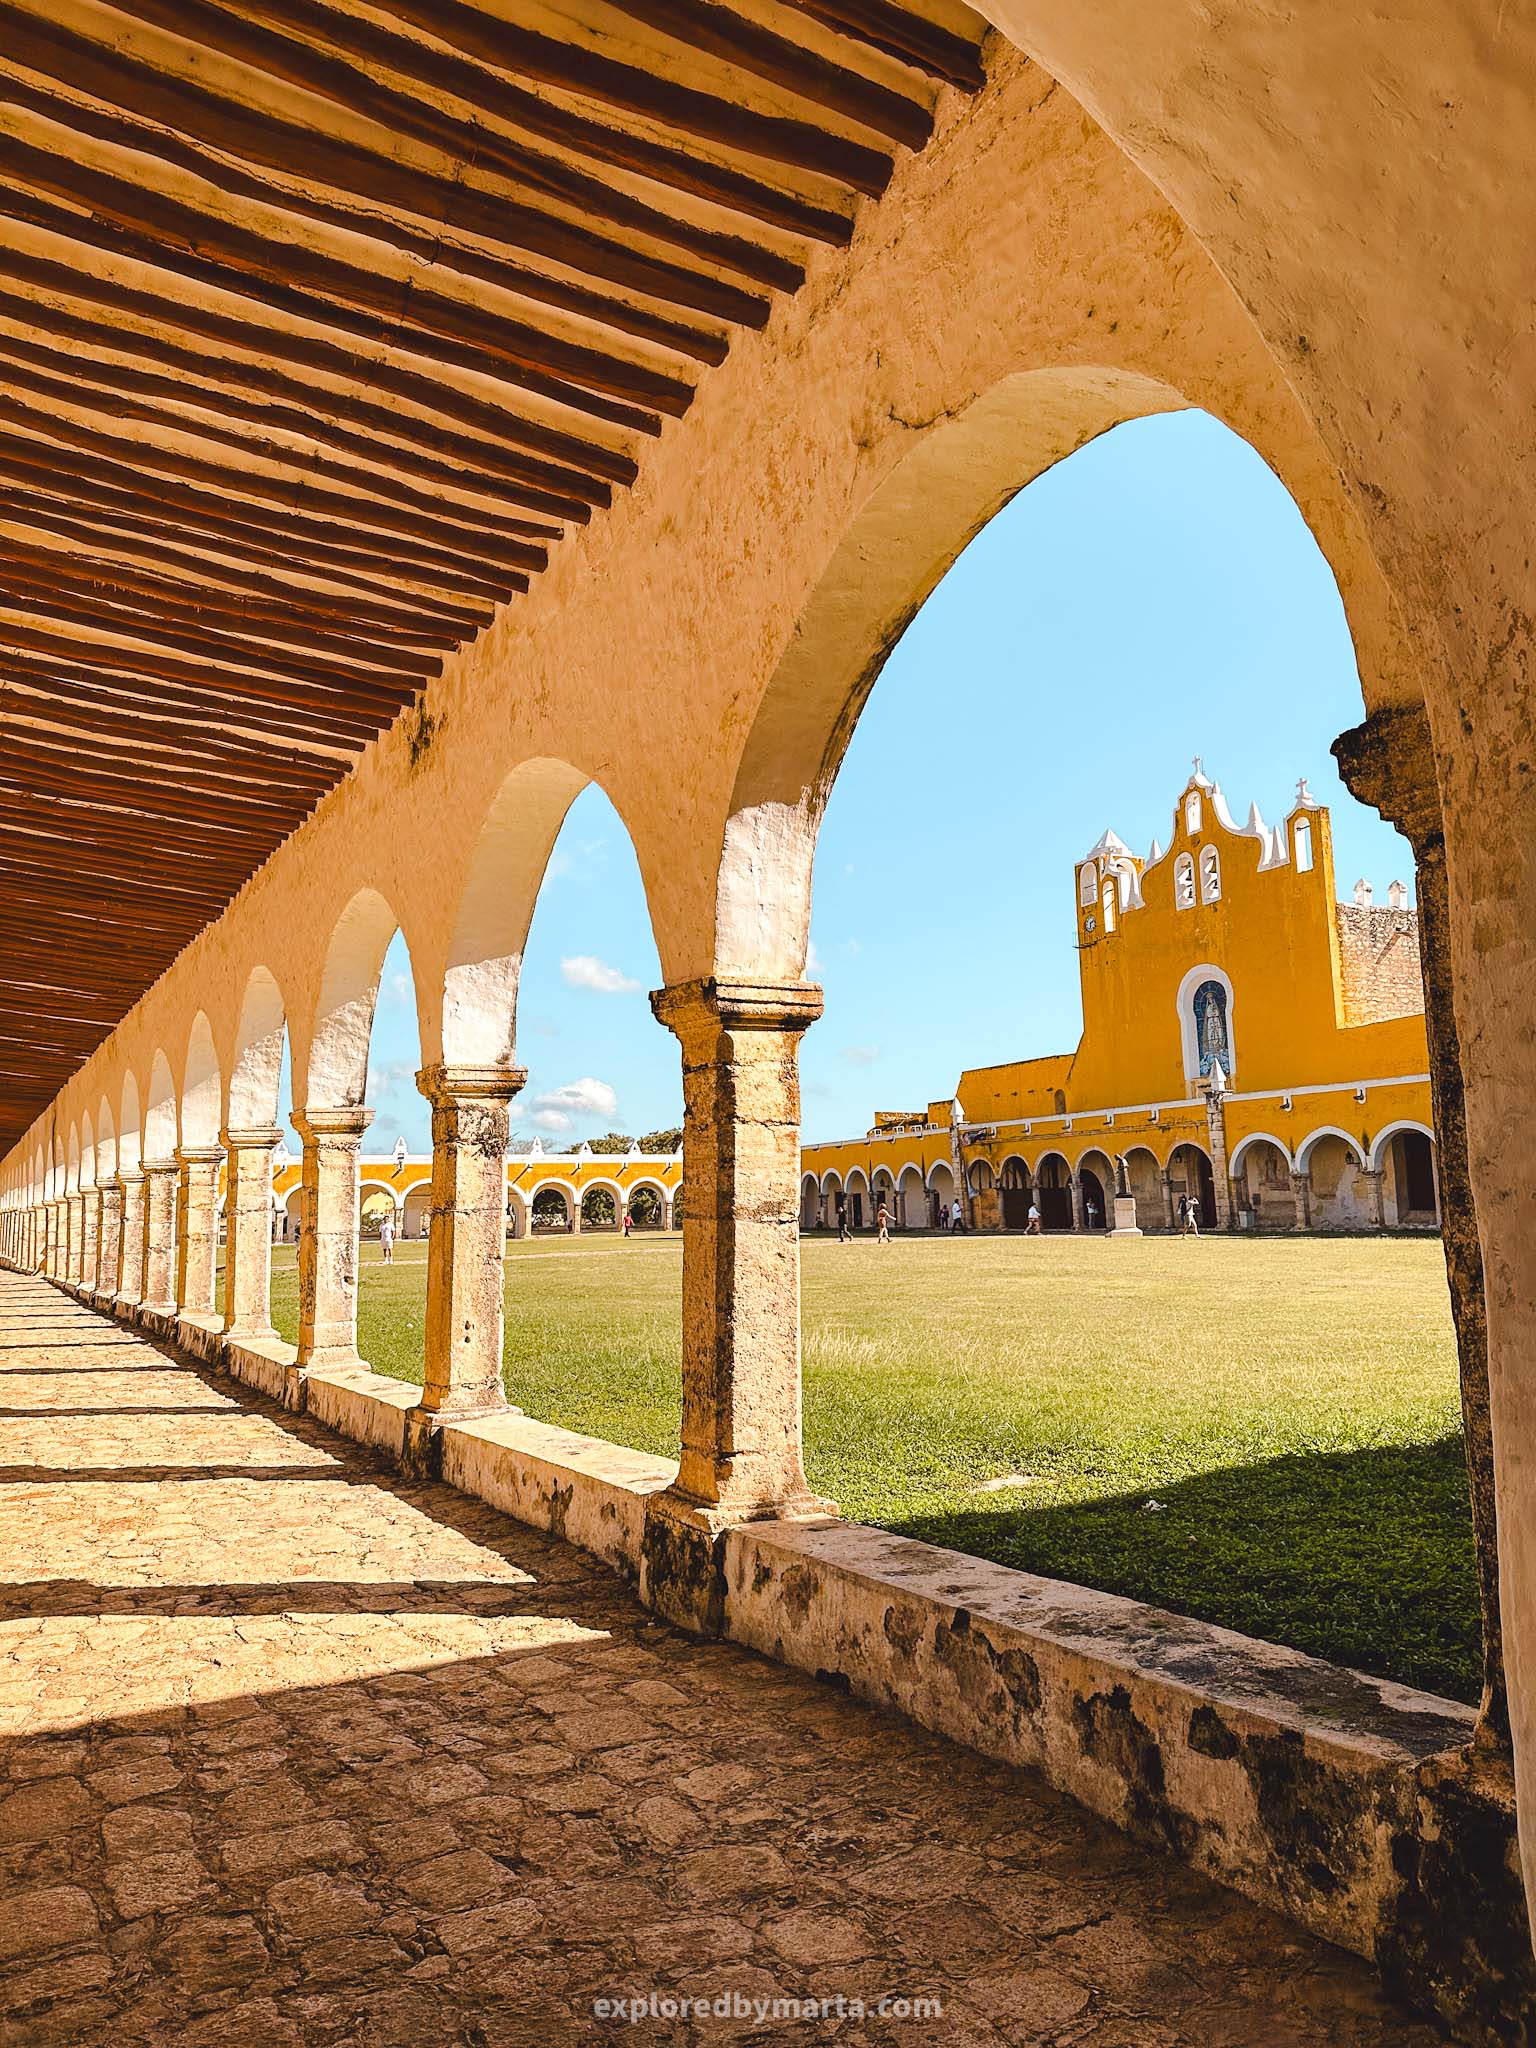 Izamal, Mexico-the yellow Convento de San Antonio convent hosts the second largest atrium in the world - a grass-covered square surrounded by a beautiful arcade